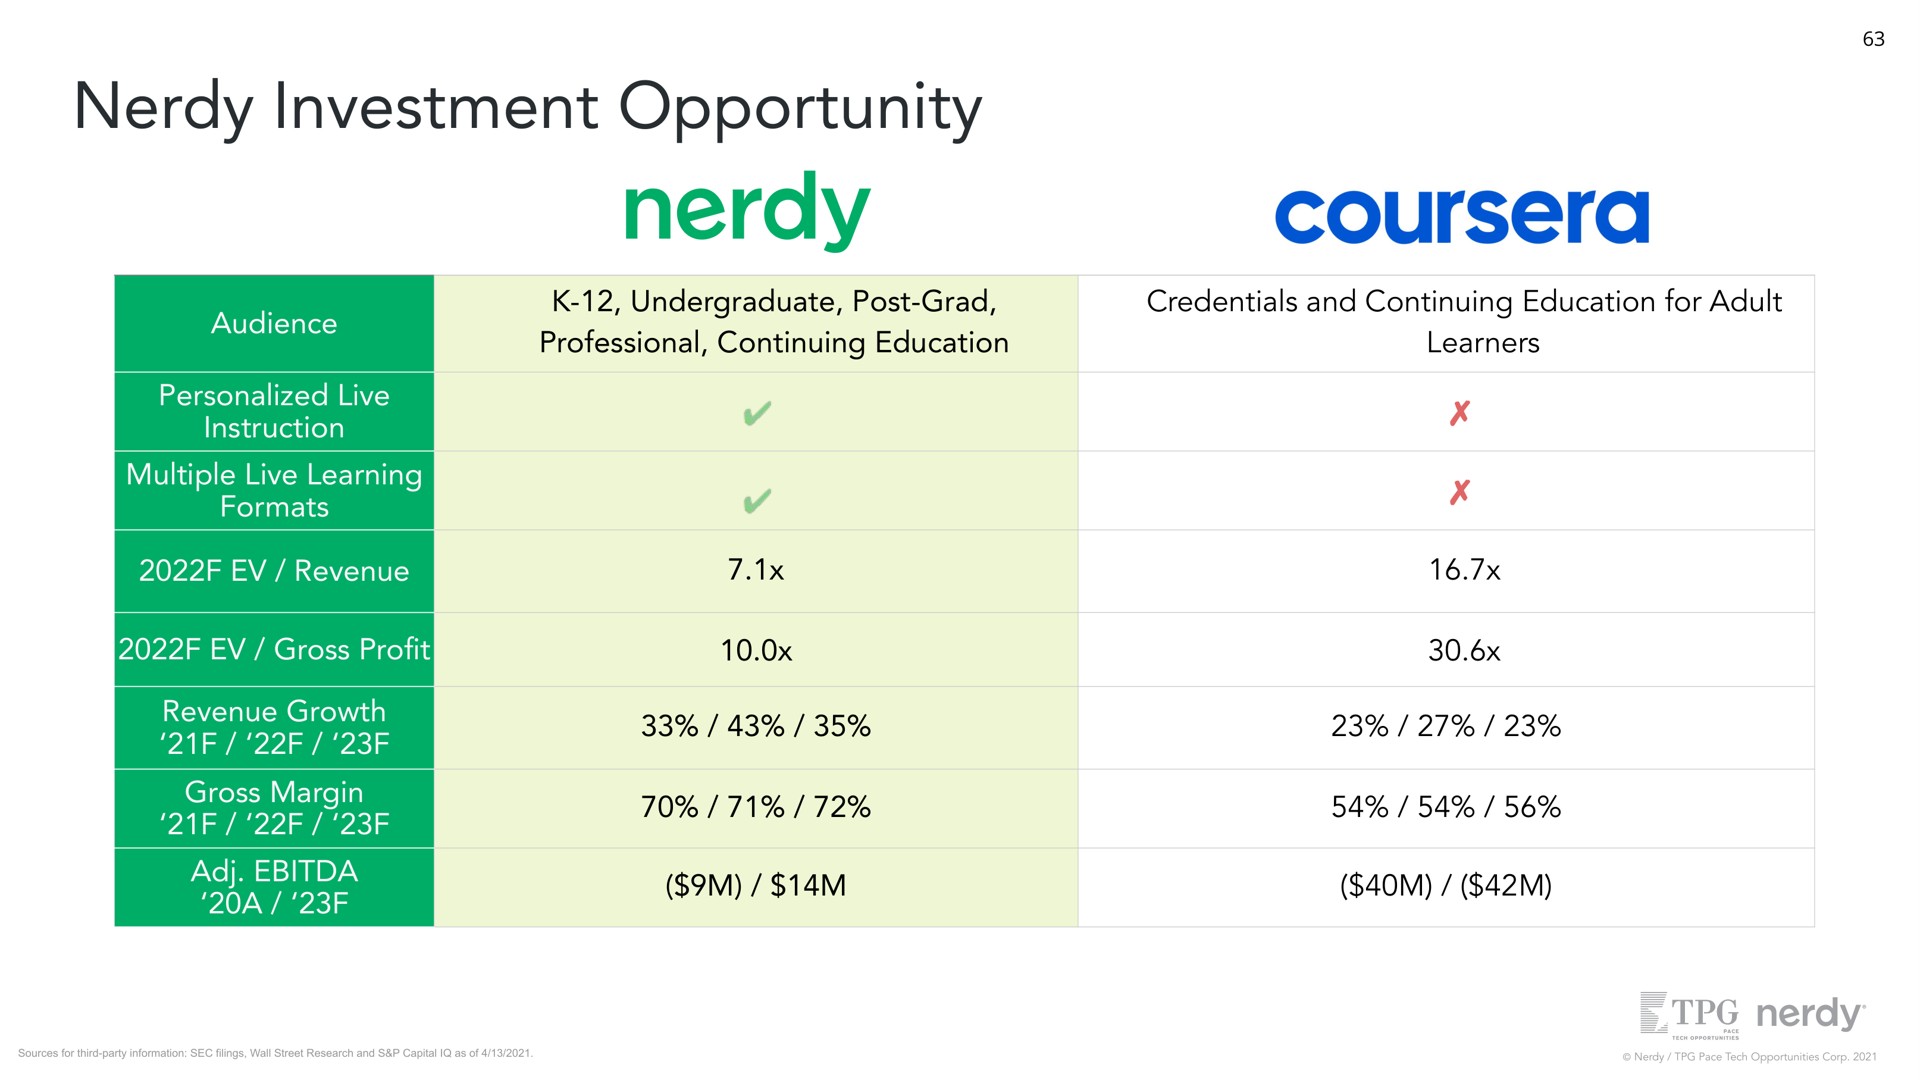 investment opportunity audience personalized live instruction multiple live learning formats revenue gross pro revenue growth gross margin a undergraduate post grad professional continuing education credentials and continuing education for adult learners | Nerdy